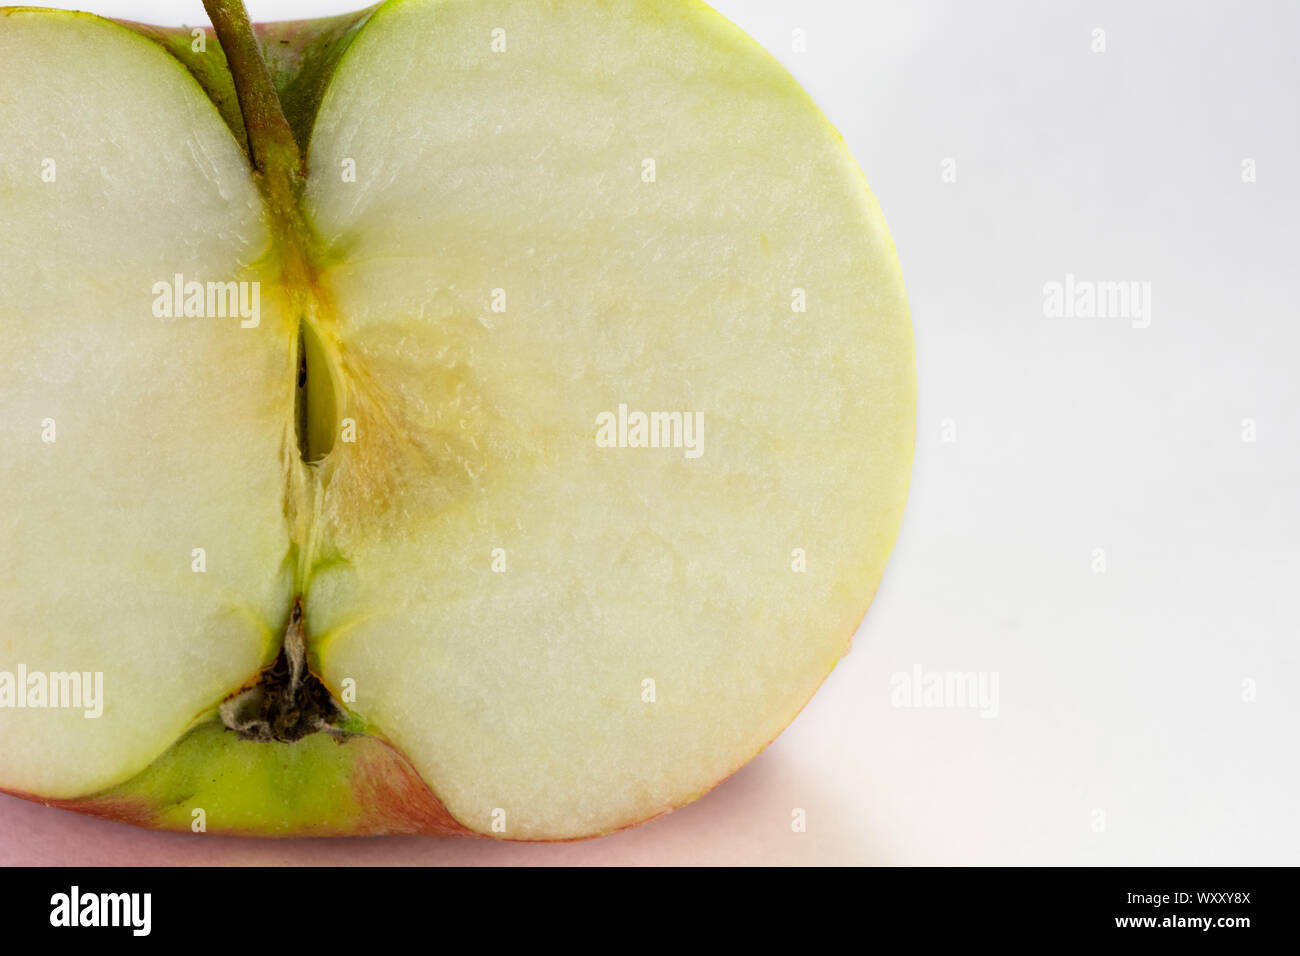 Bright vibrant fresh apple sliced in half. Photography taken on white backgound with macro lens. Stock Photo